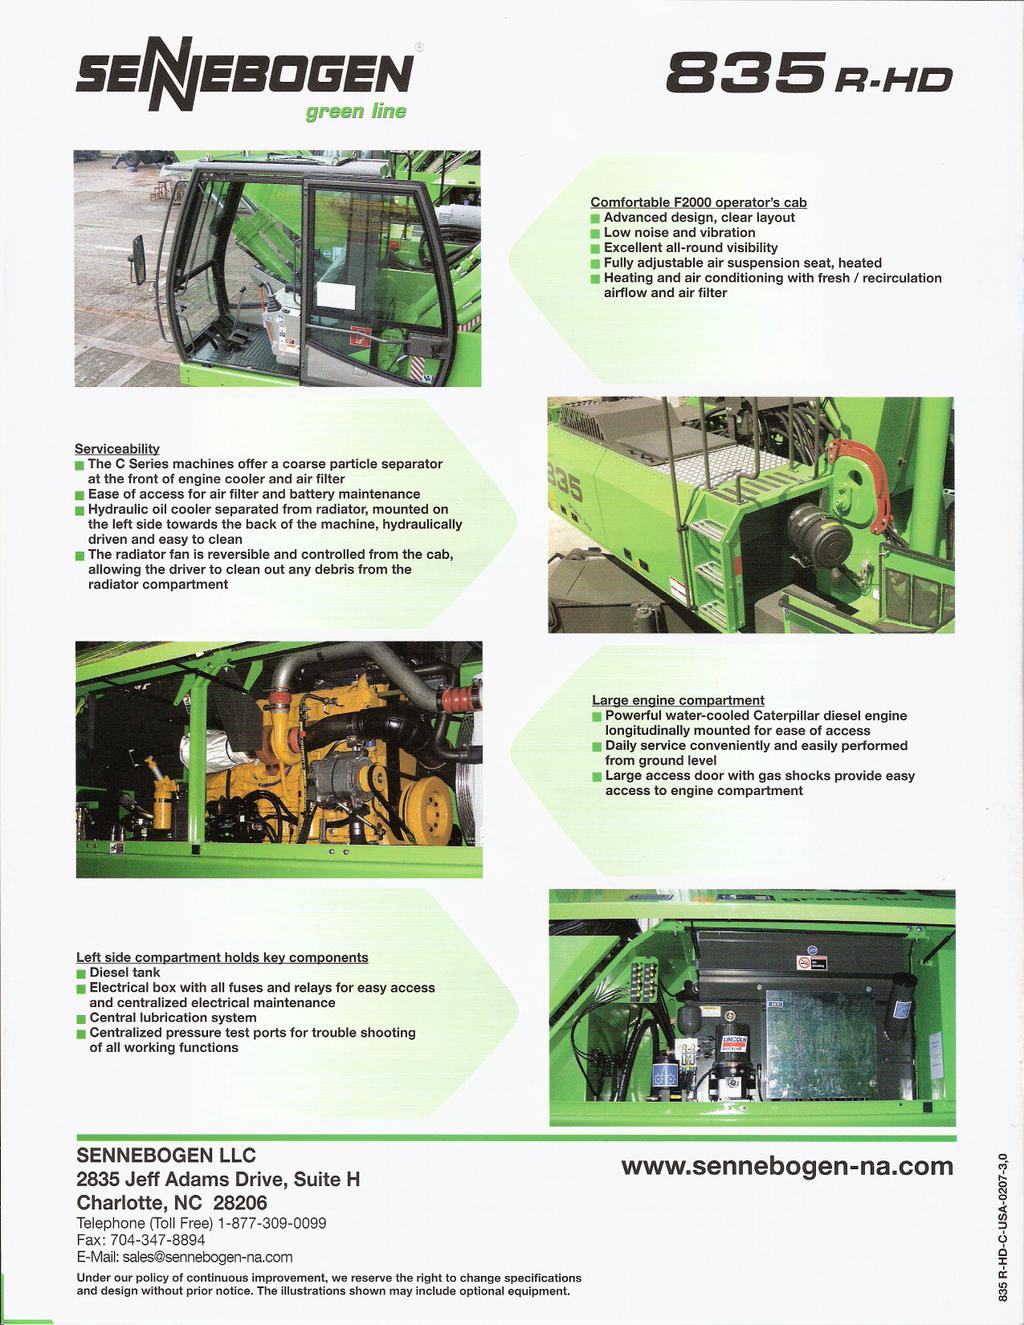 5E/j:(JEBDGEN" green line B35R-HO Comfortable F2000 operator's cab Advanced design clear layout Low noise and vibration Excellent all-round visibility Fully adjustable air suspension seat heated